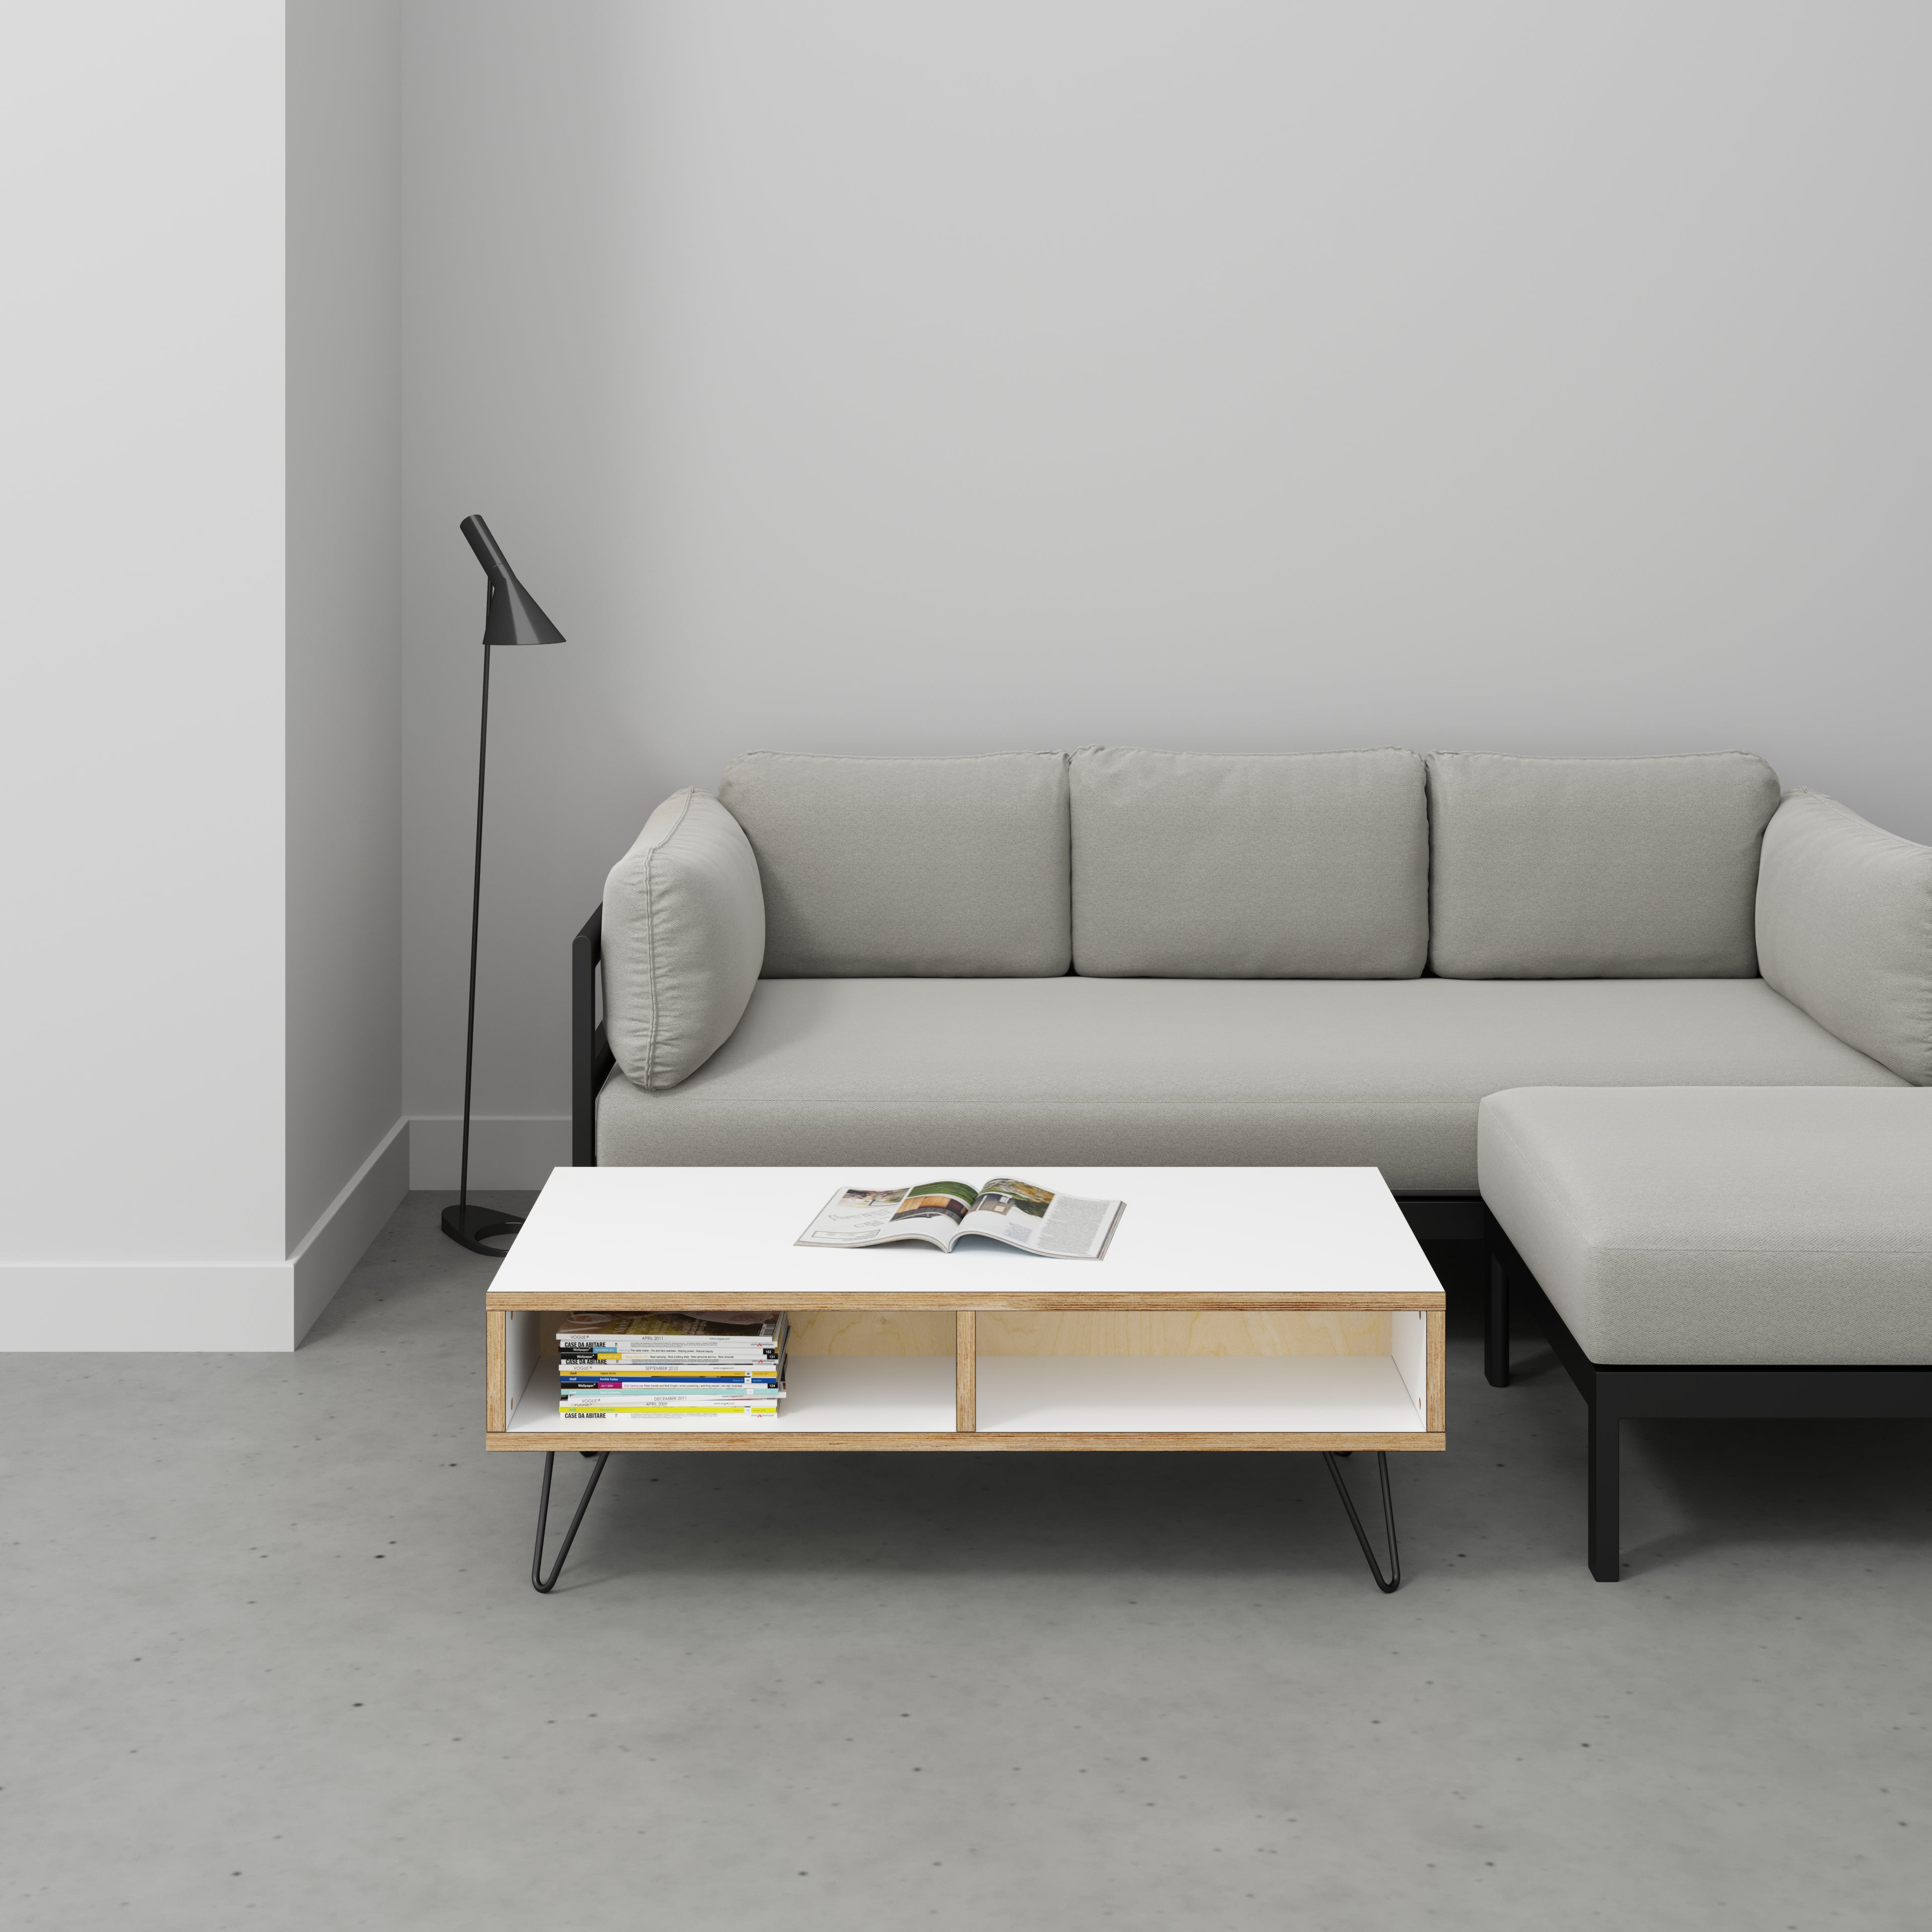 Coffee Table with Box Storage and Black Hairpin Legs - Formica White - 1200(w) x 600(d) x 400(h)